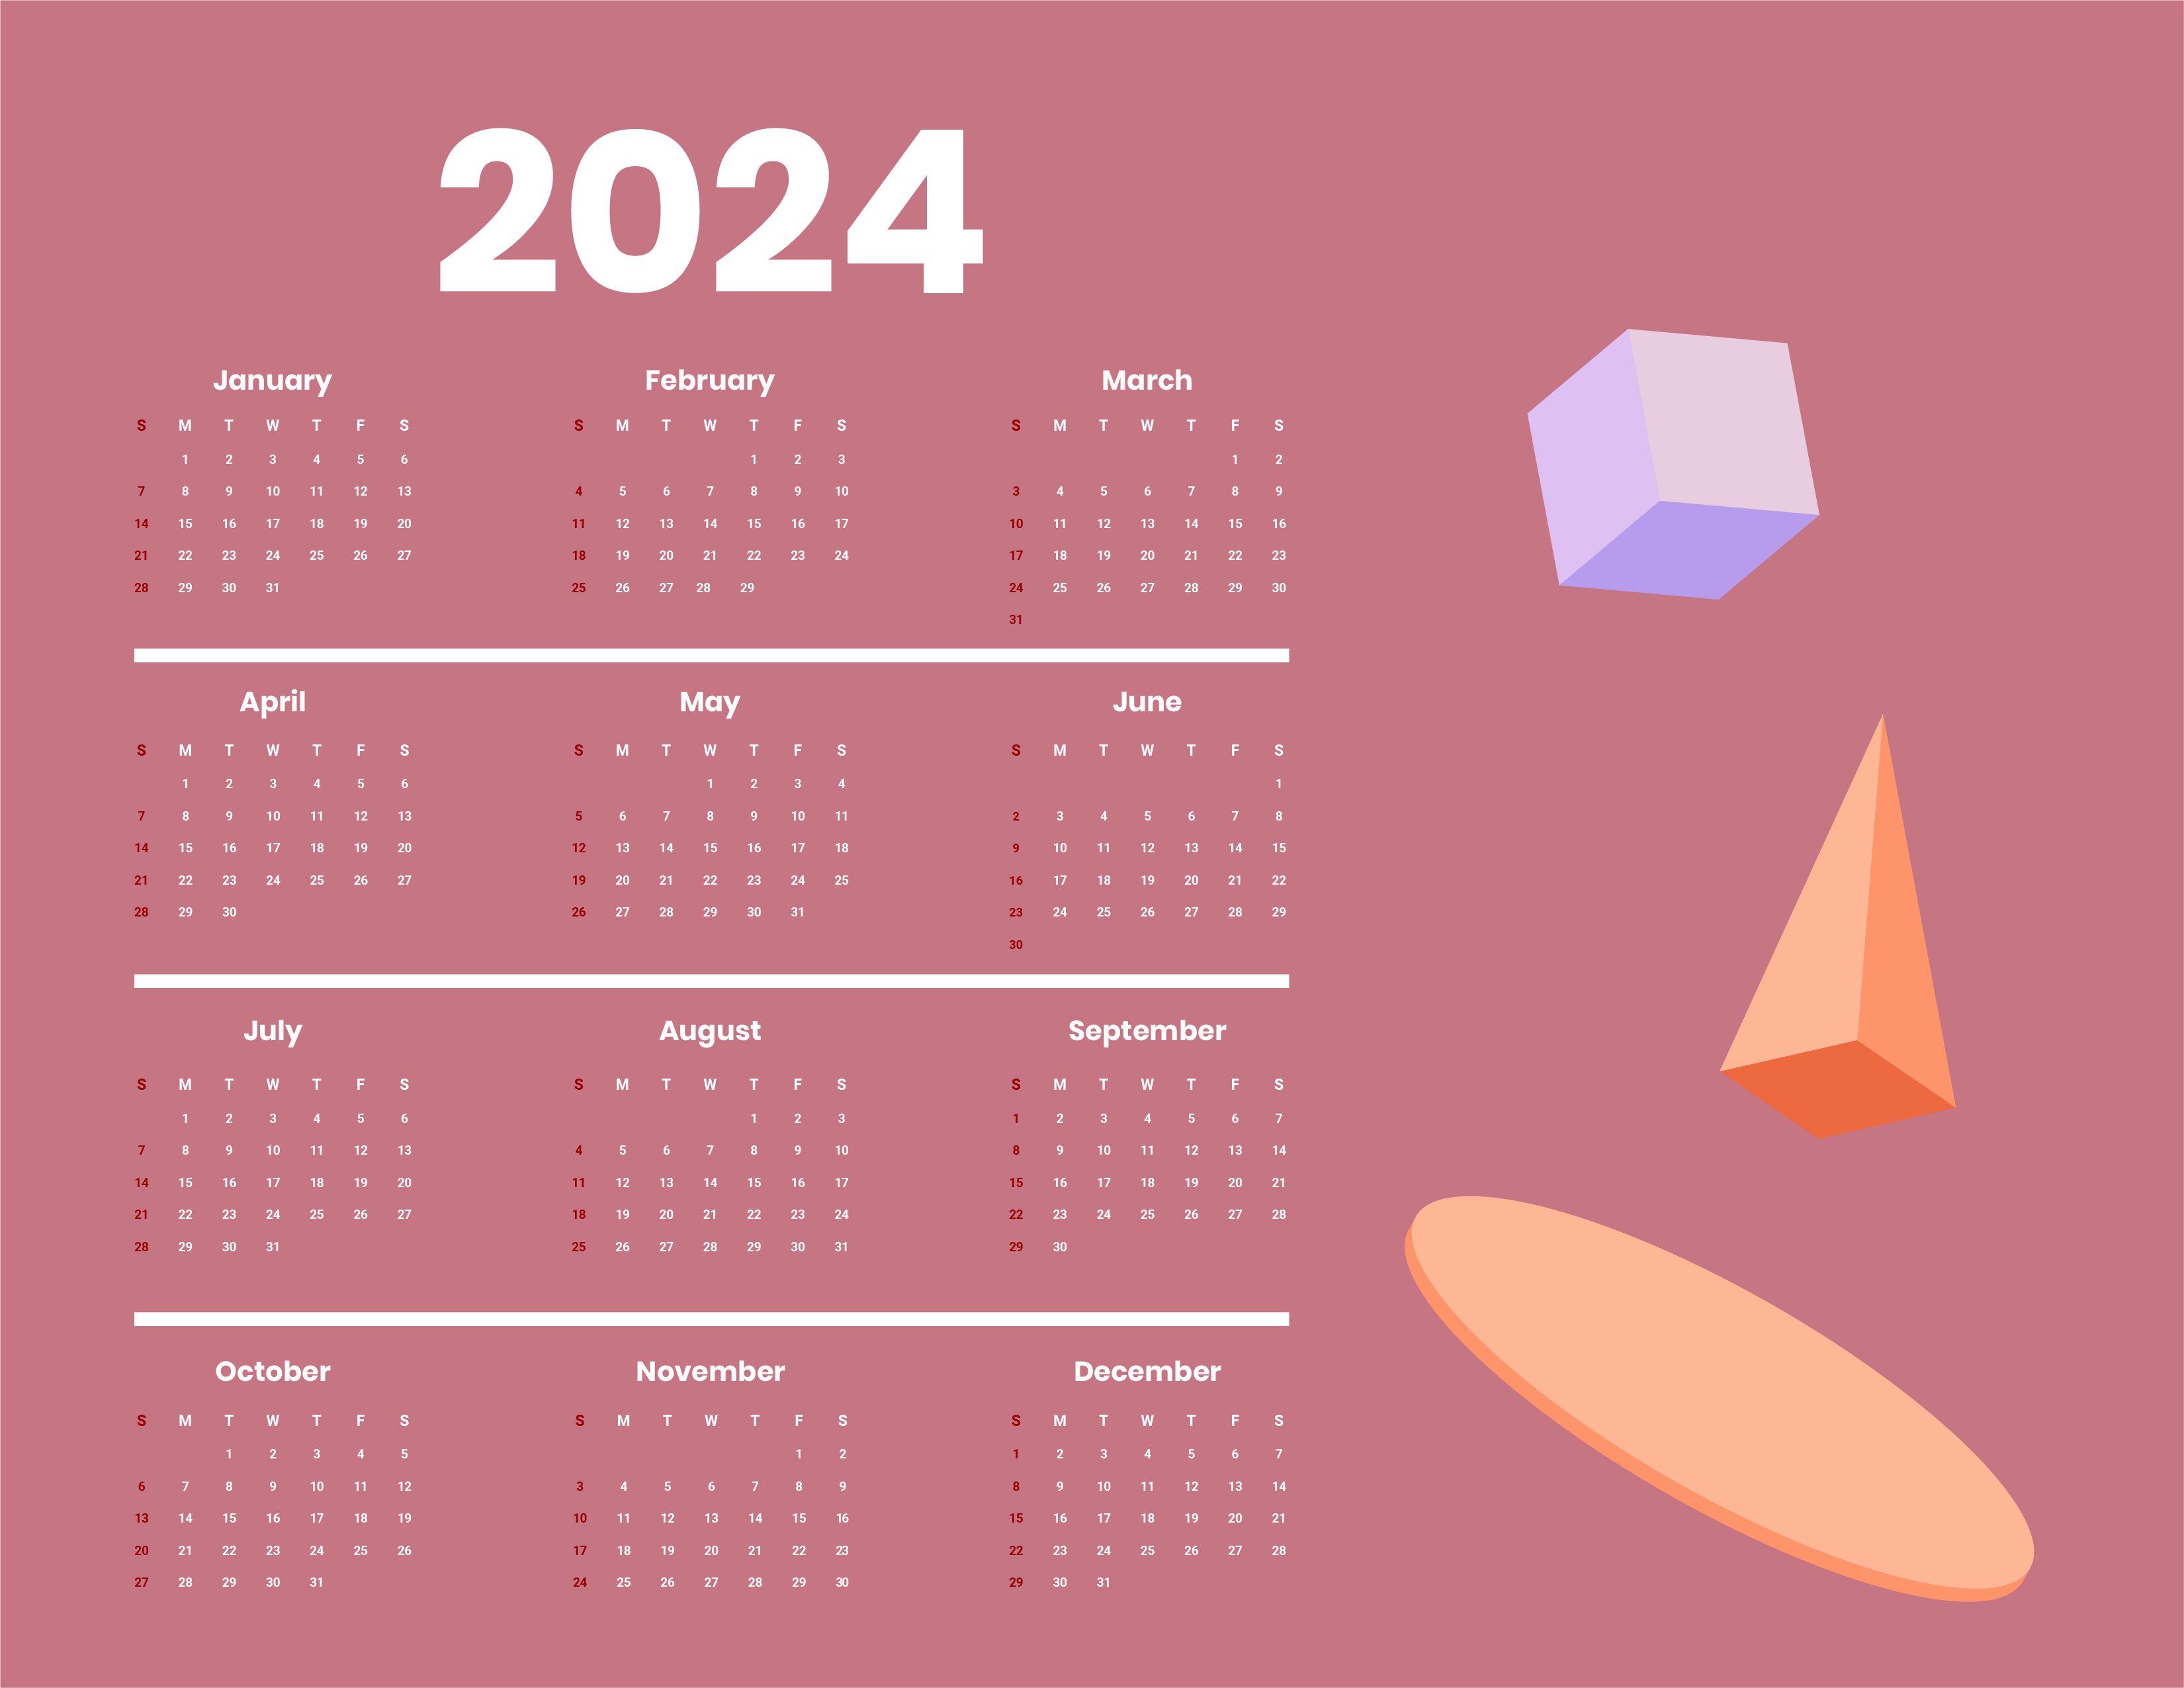 FREE Year 2024 Calendar Template Download in Word, Google Docs, Excel